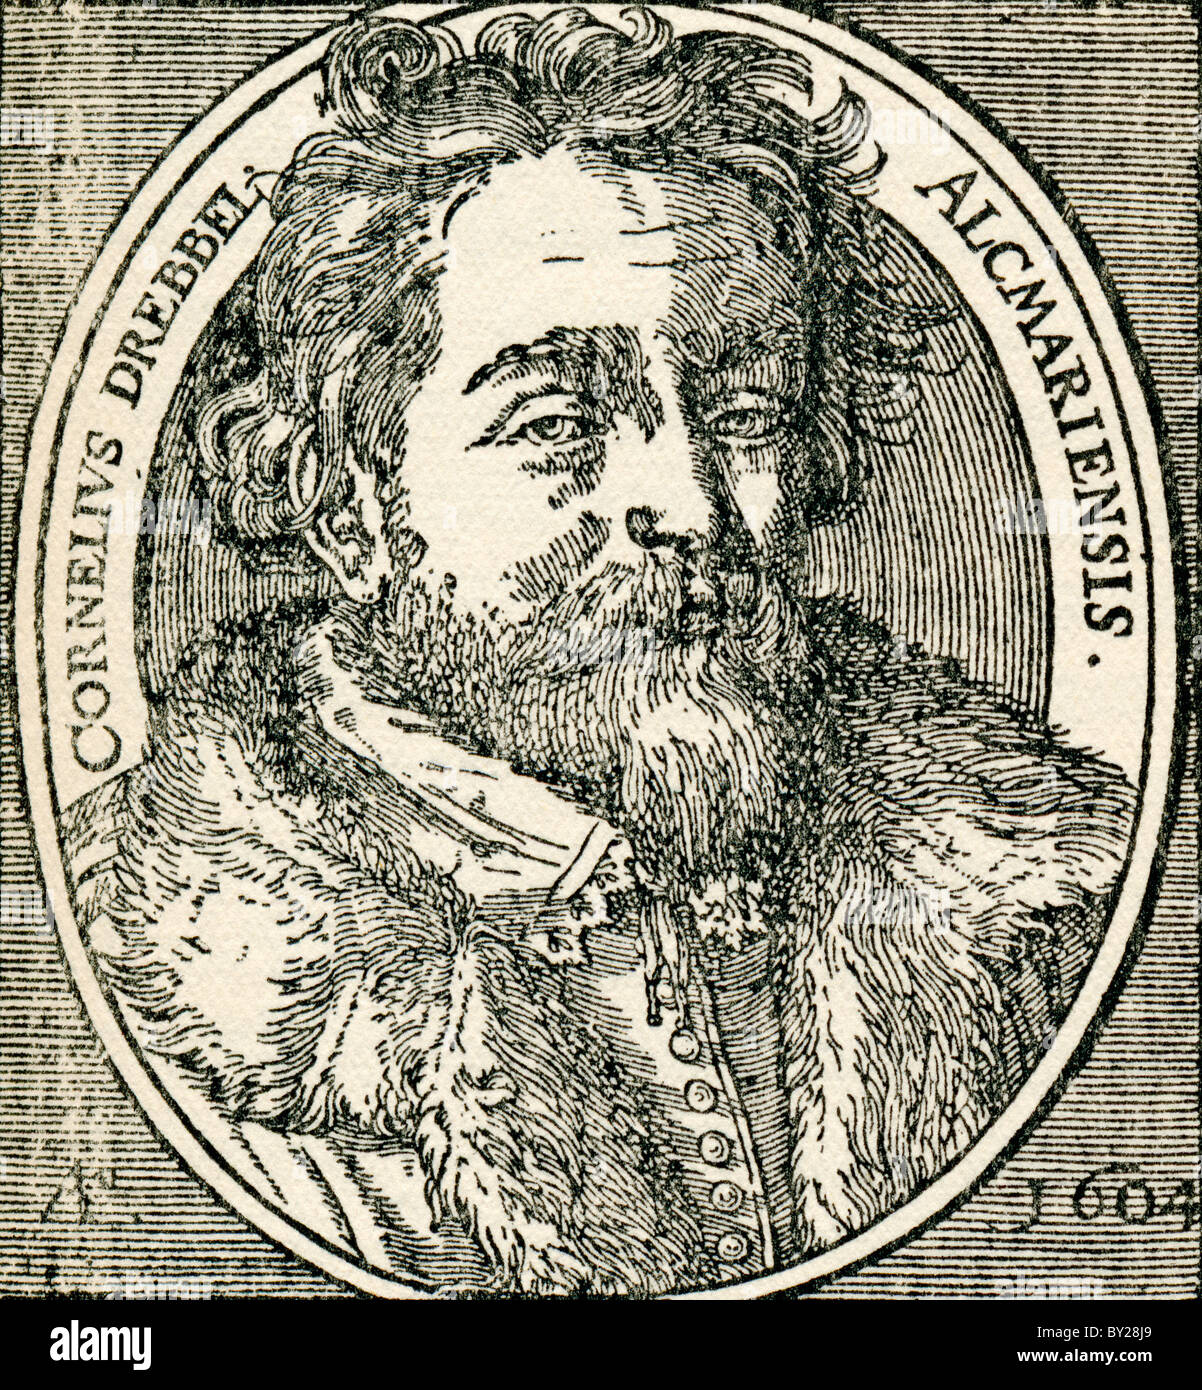 Cornelius Jacobszoon Drebbel, 1572 to 1633. Dutch inventor of the first navigable submarine in 1620. Stock Photo